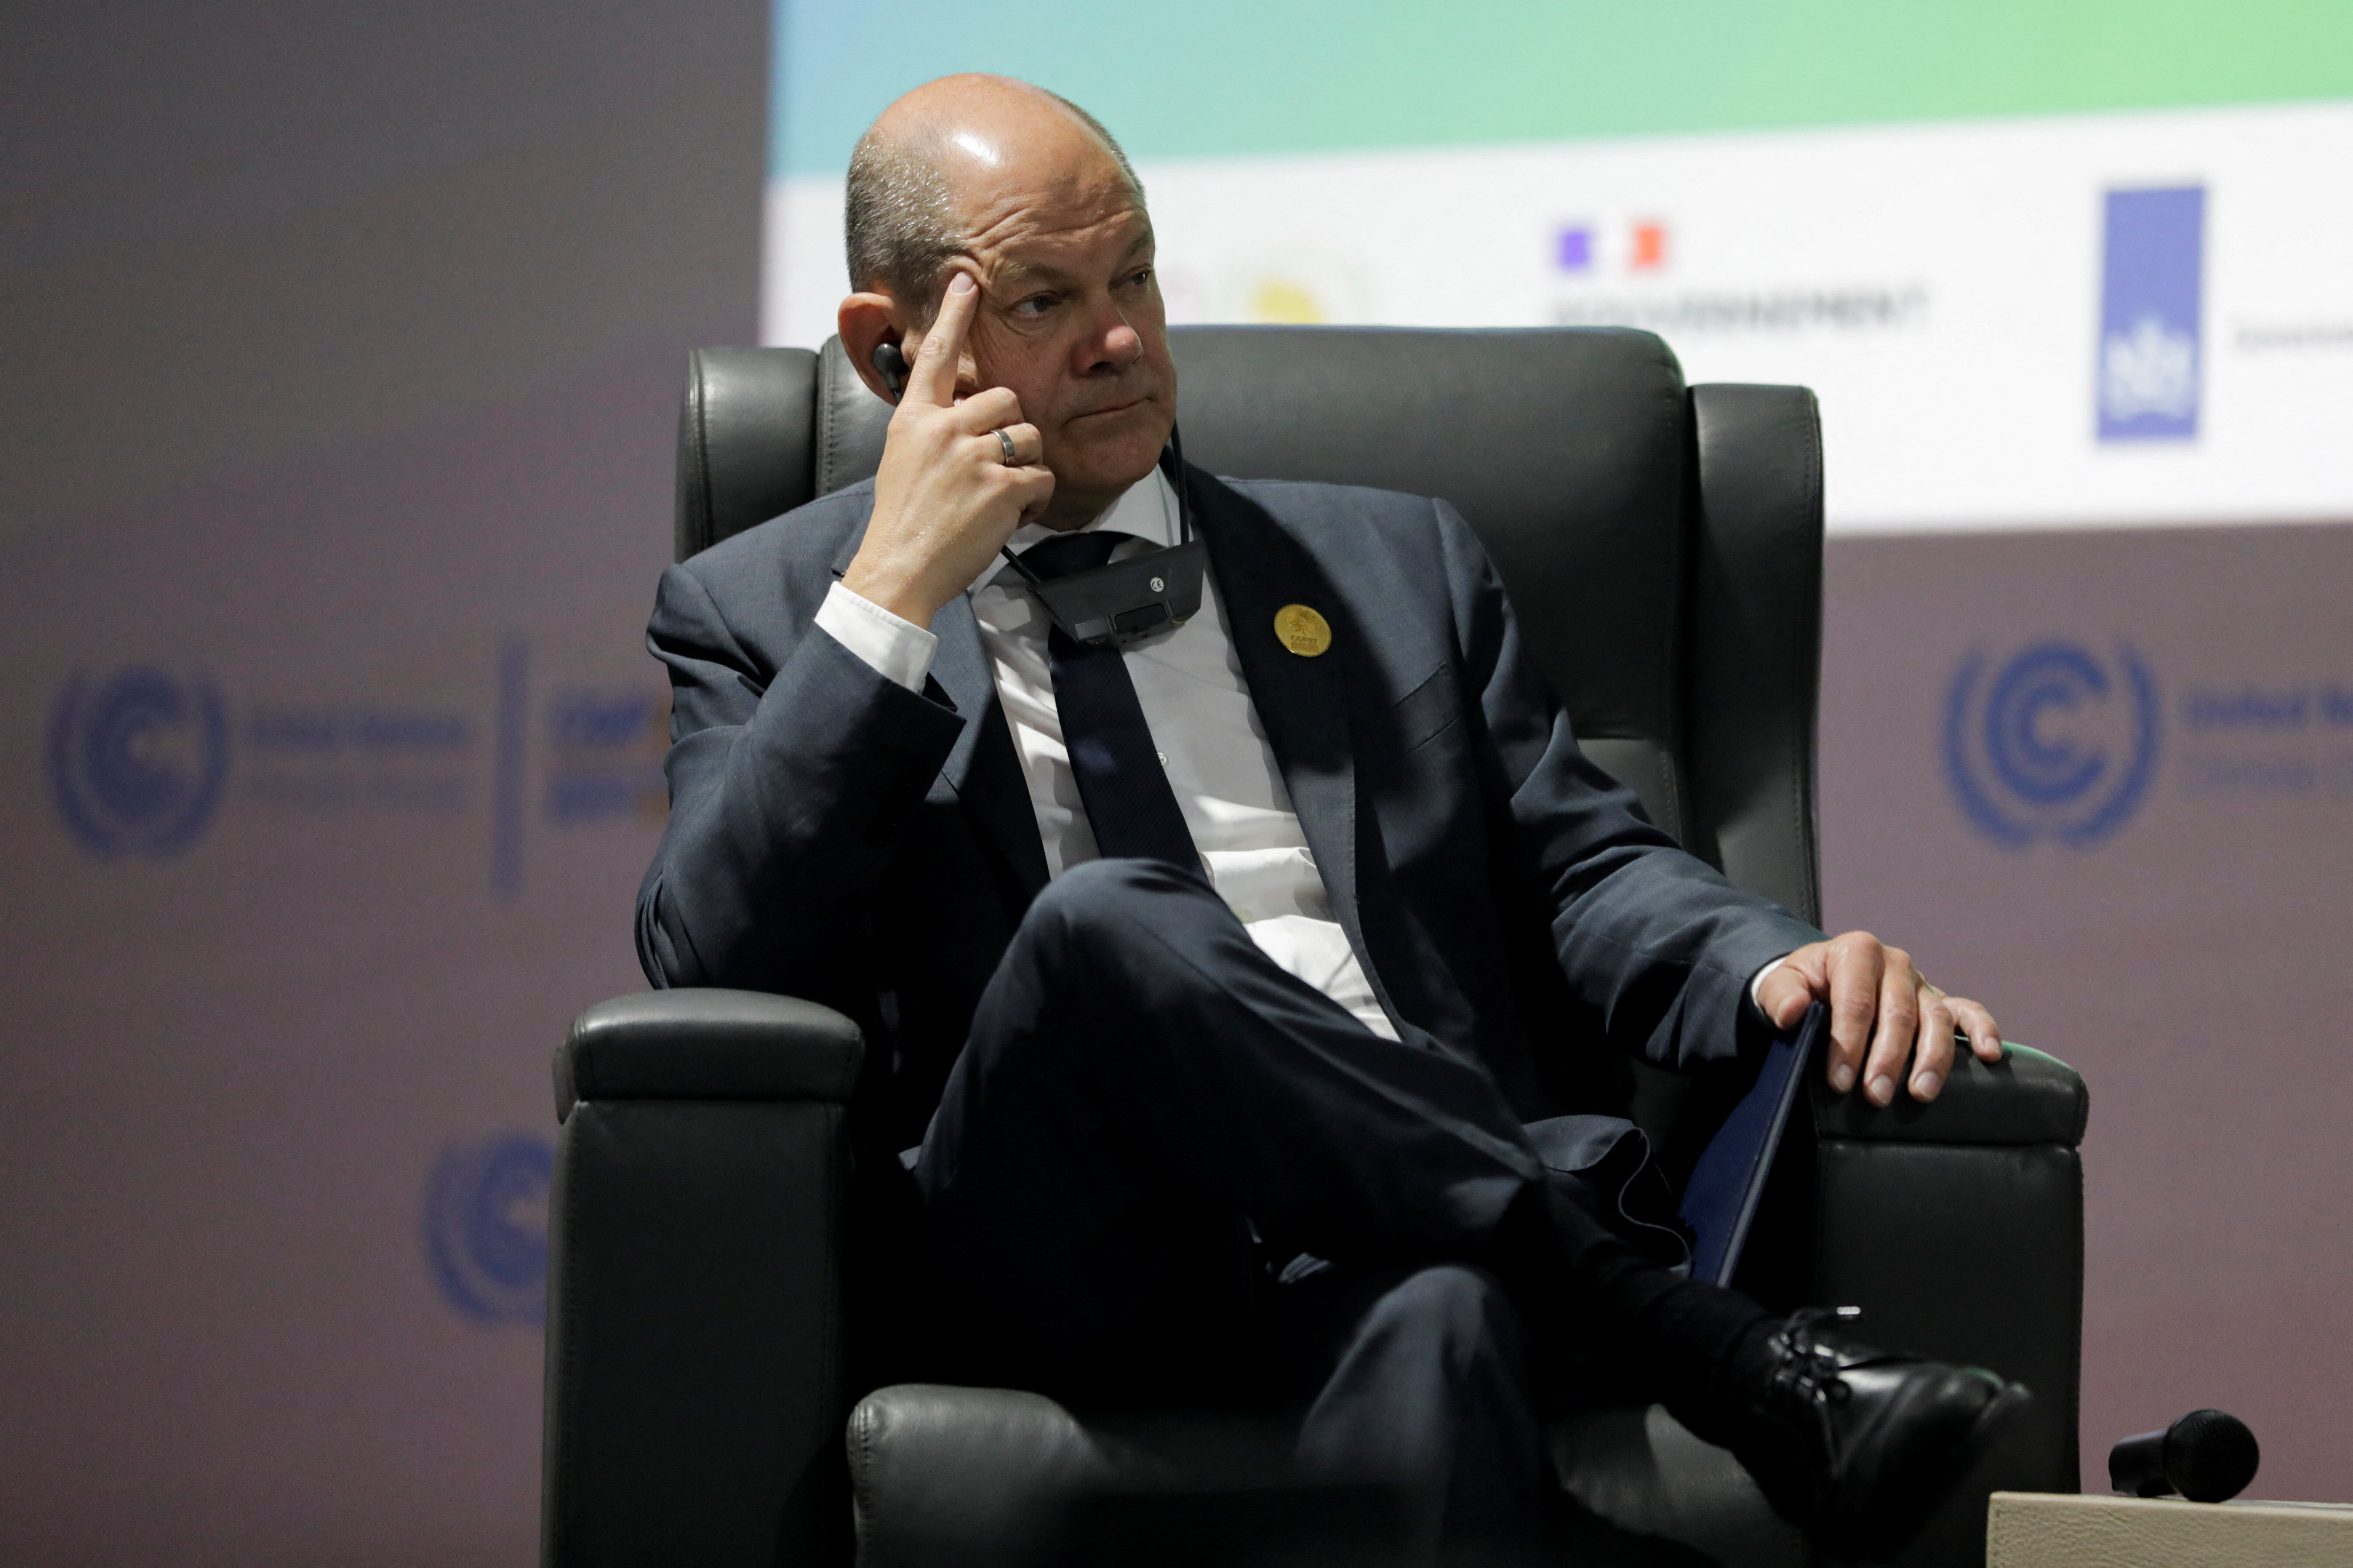 German Chancellor Olaf Scholz attends the COP27 climate summit in Sharm el-Sheikh